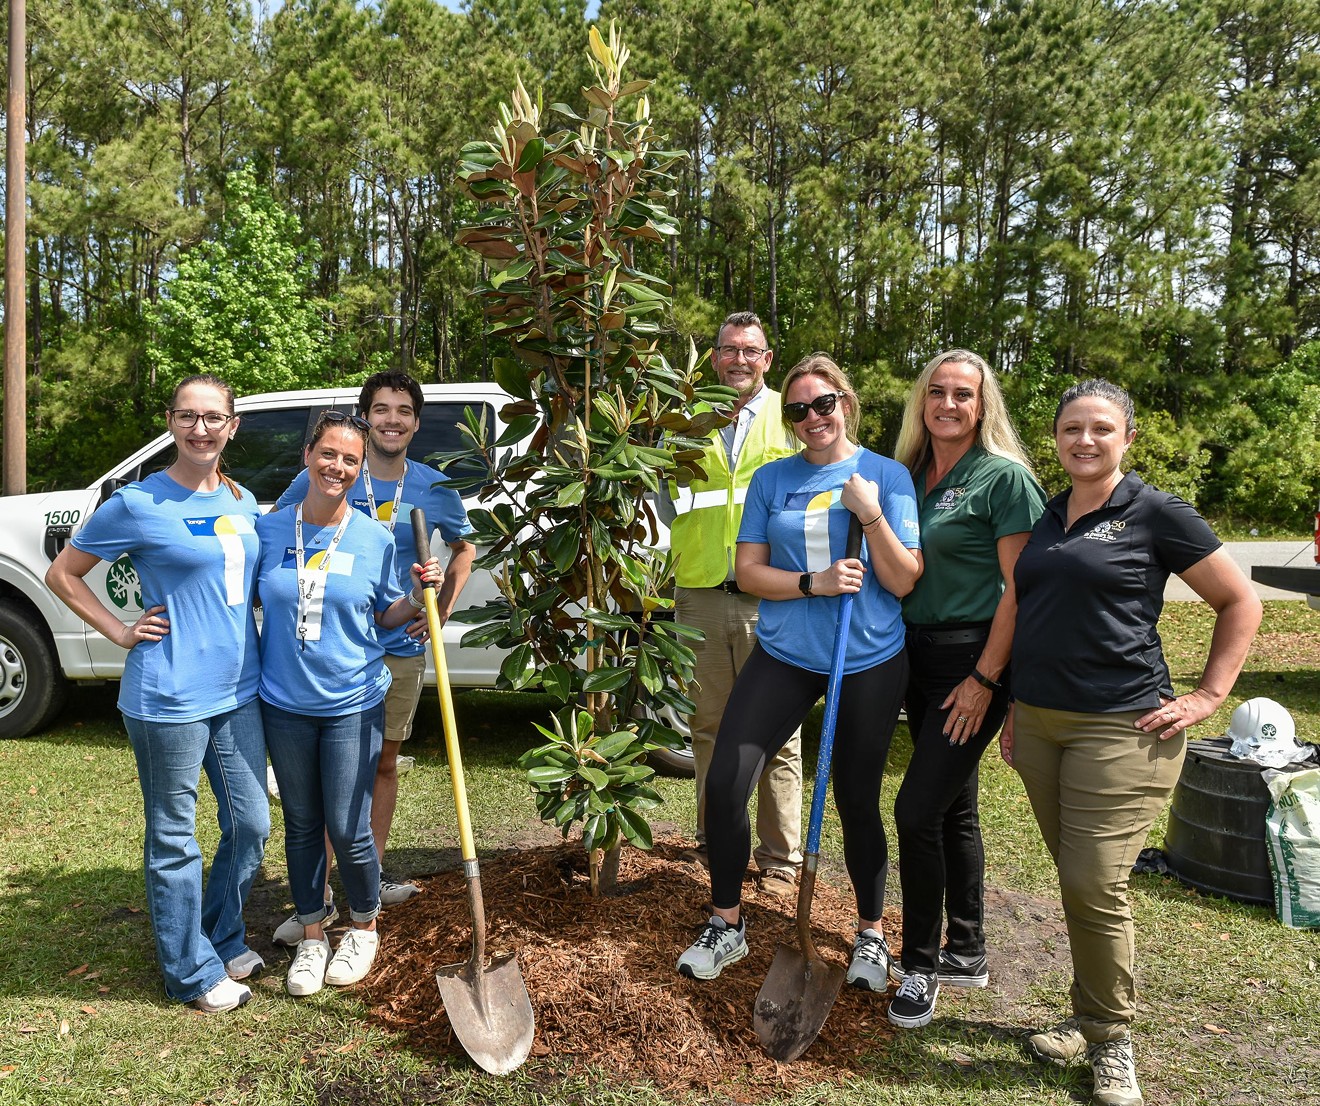 Tanger Outlets and The Greenery Celebrates Earth Day with Tree Planting